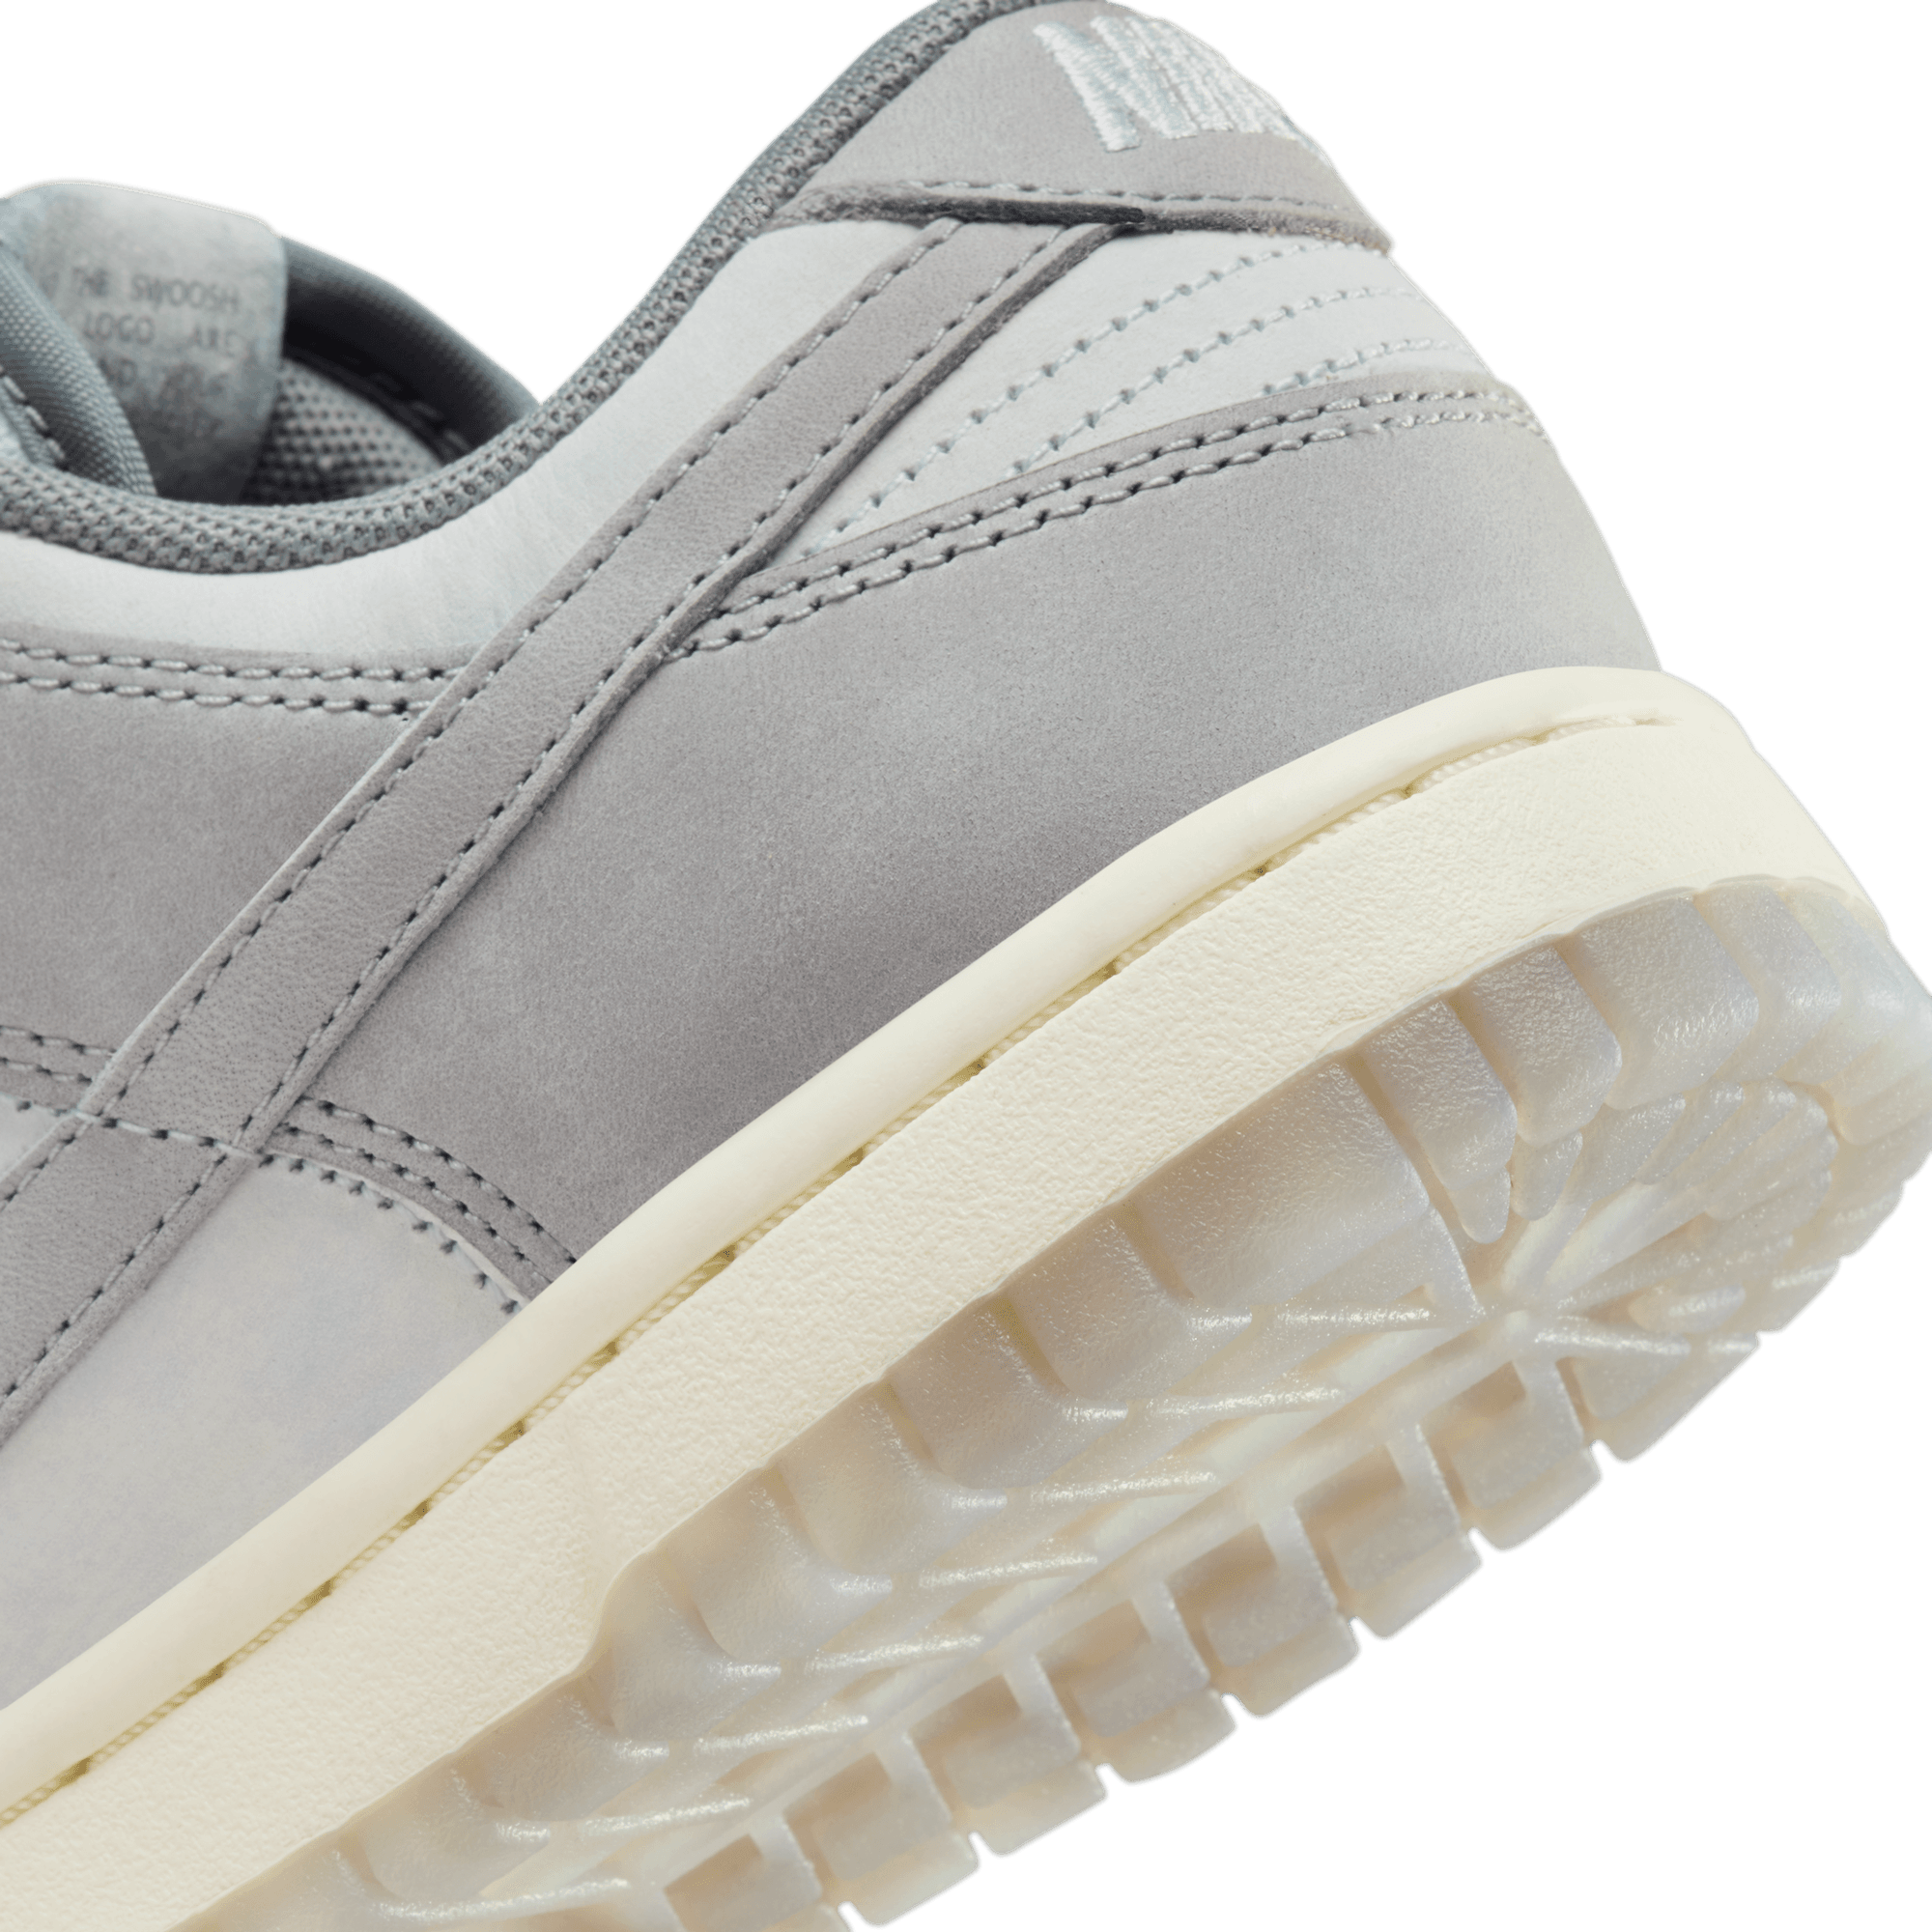 WMNS DUNK LOW "COOL GREY"